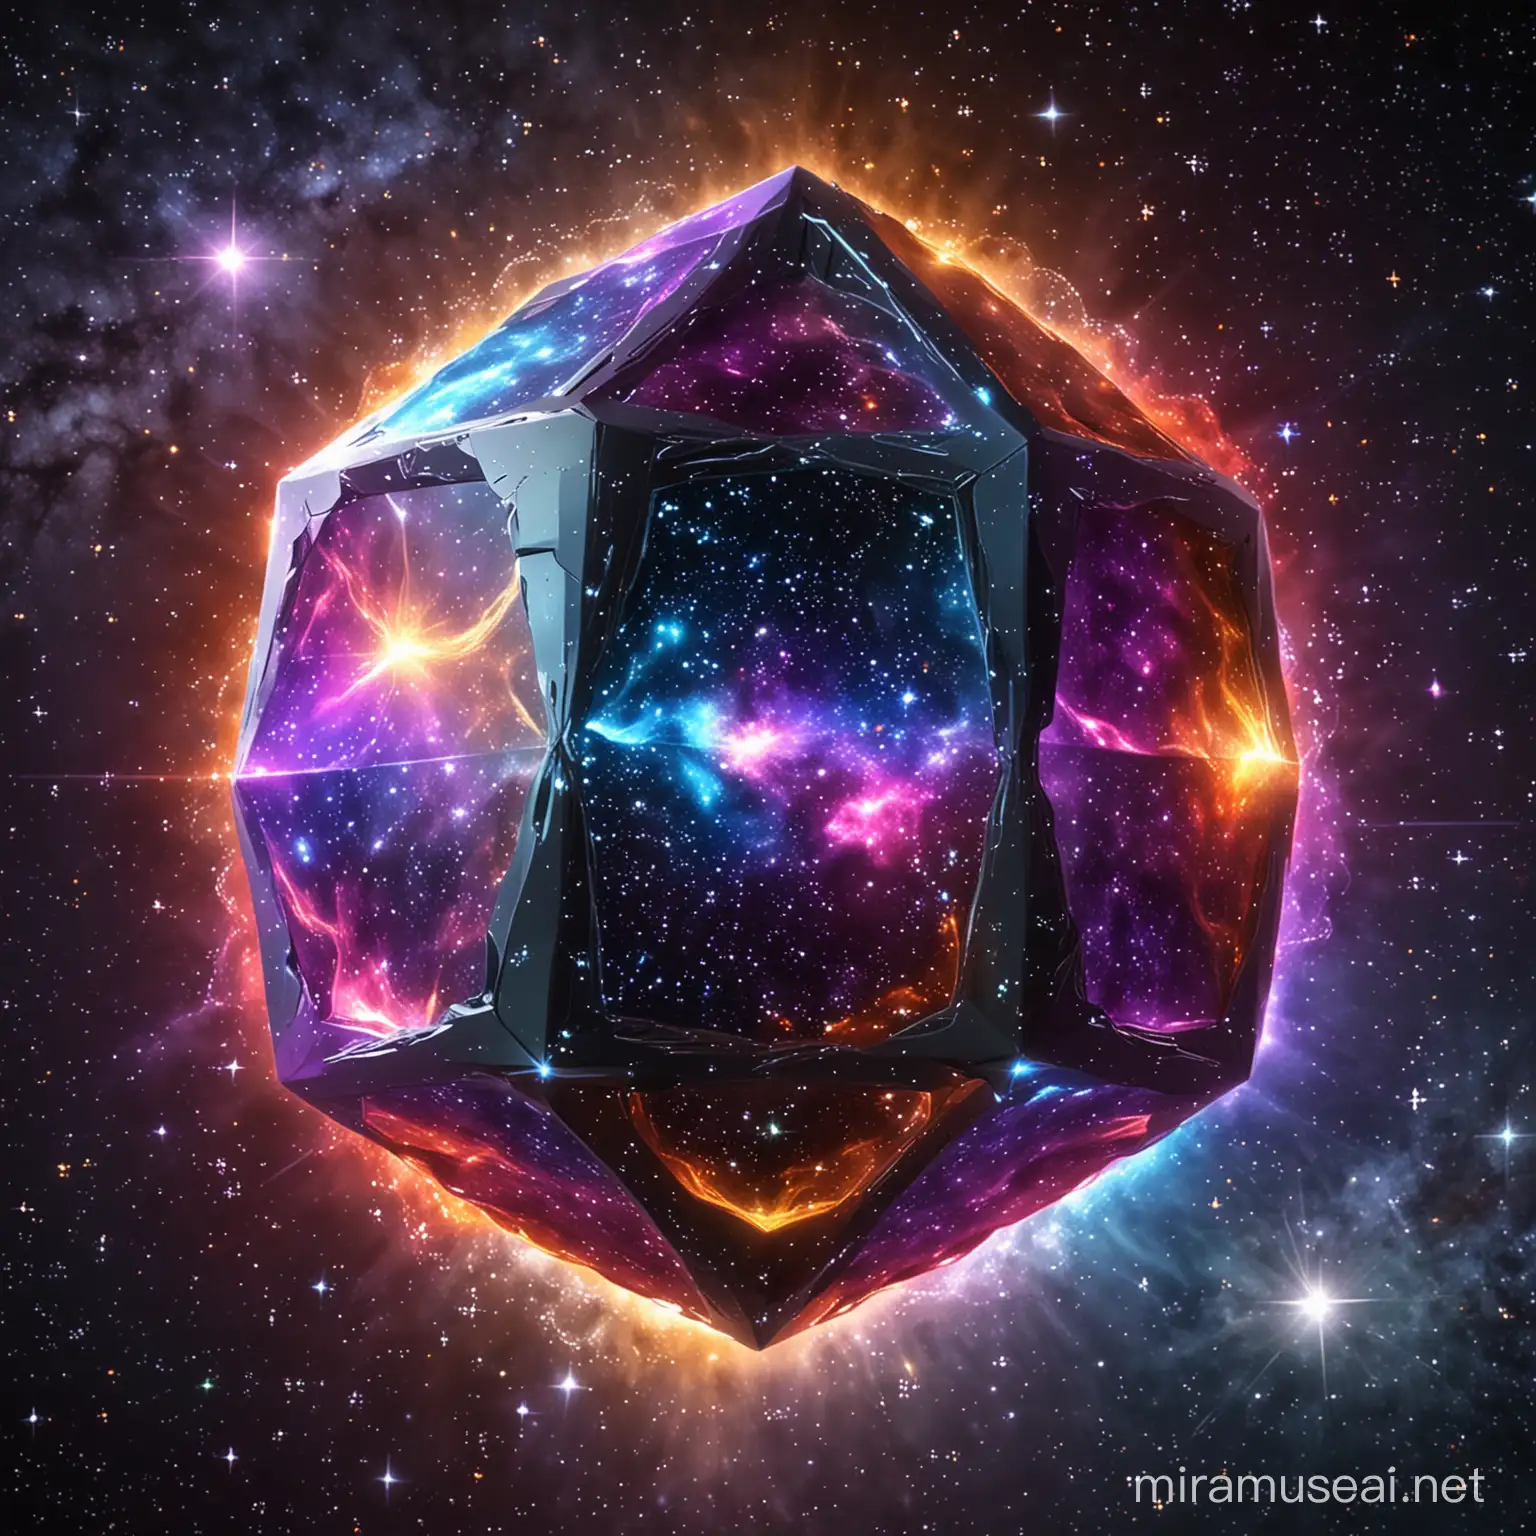 dodecahedron, 3 D,  cosmic color, in the space, with stars and the universe, rotating, 